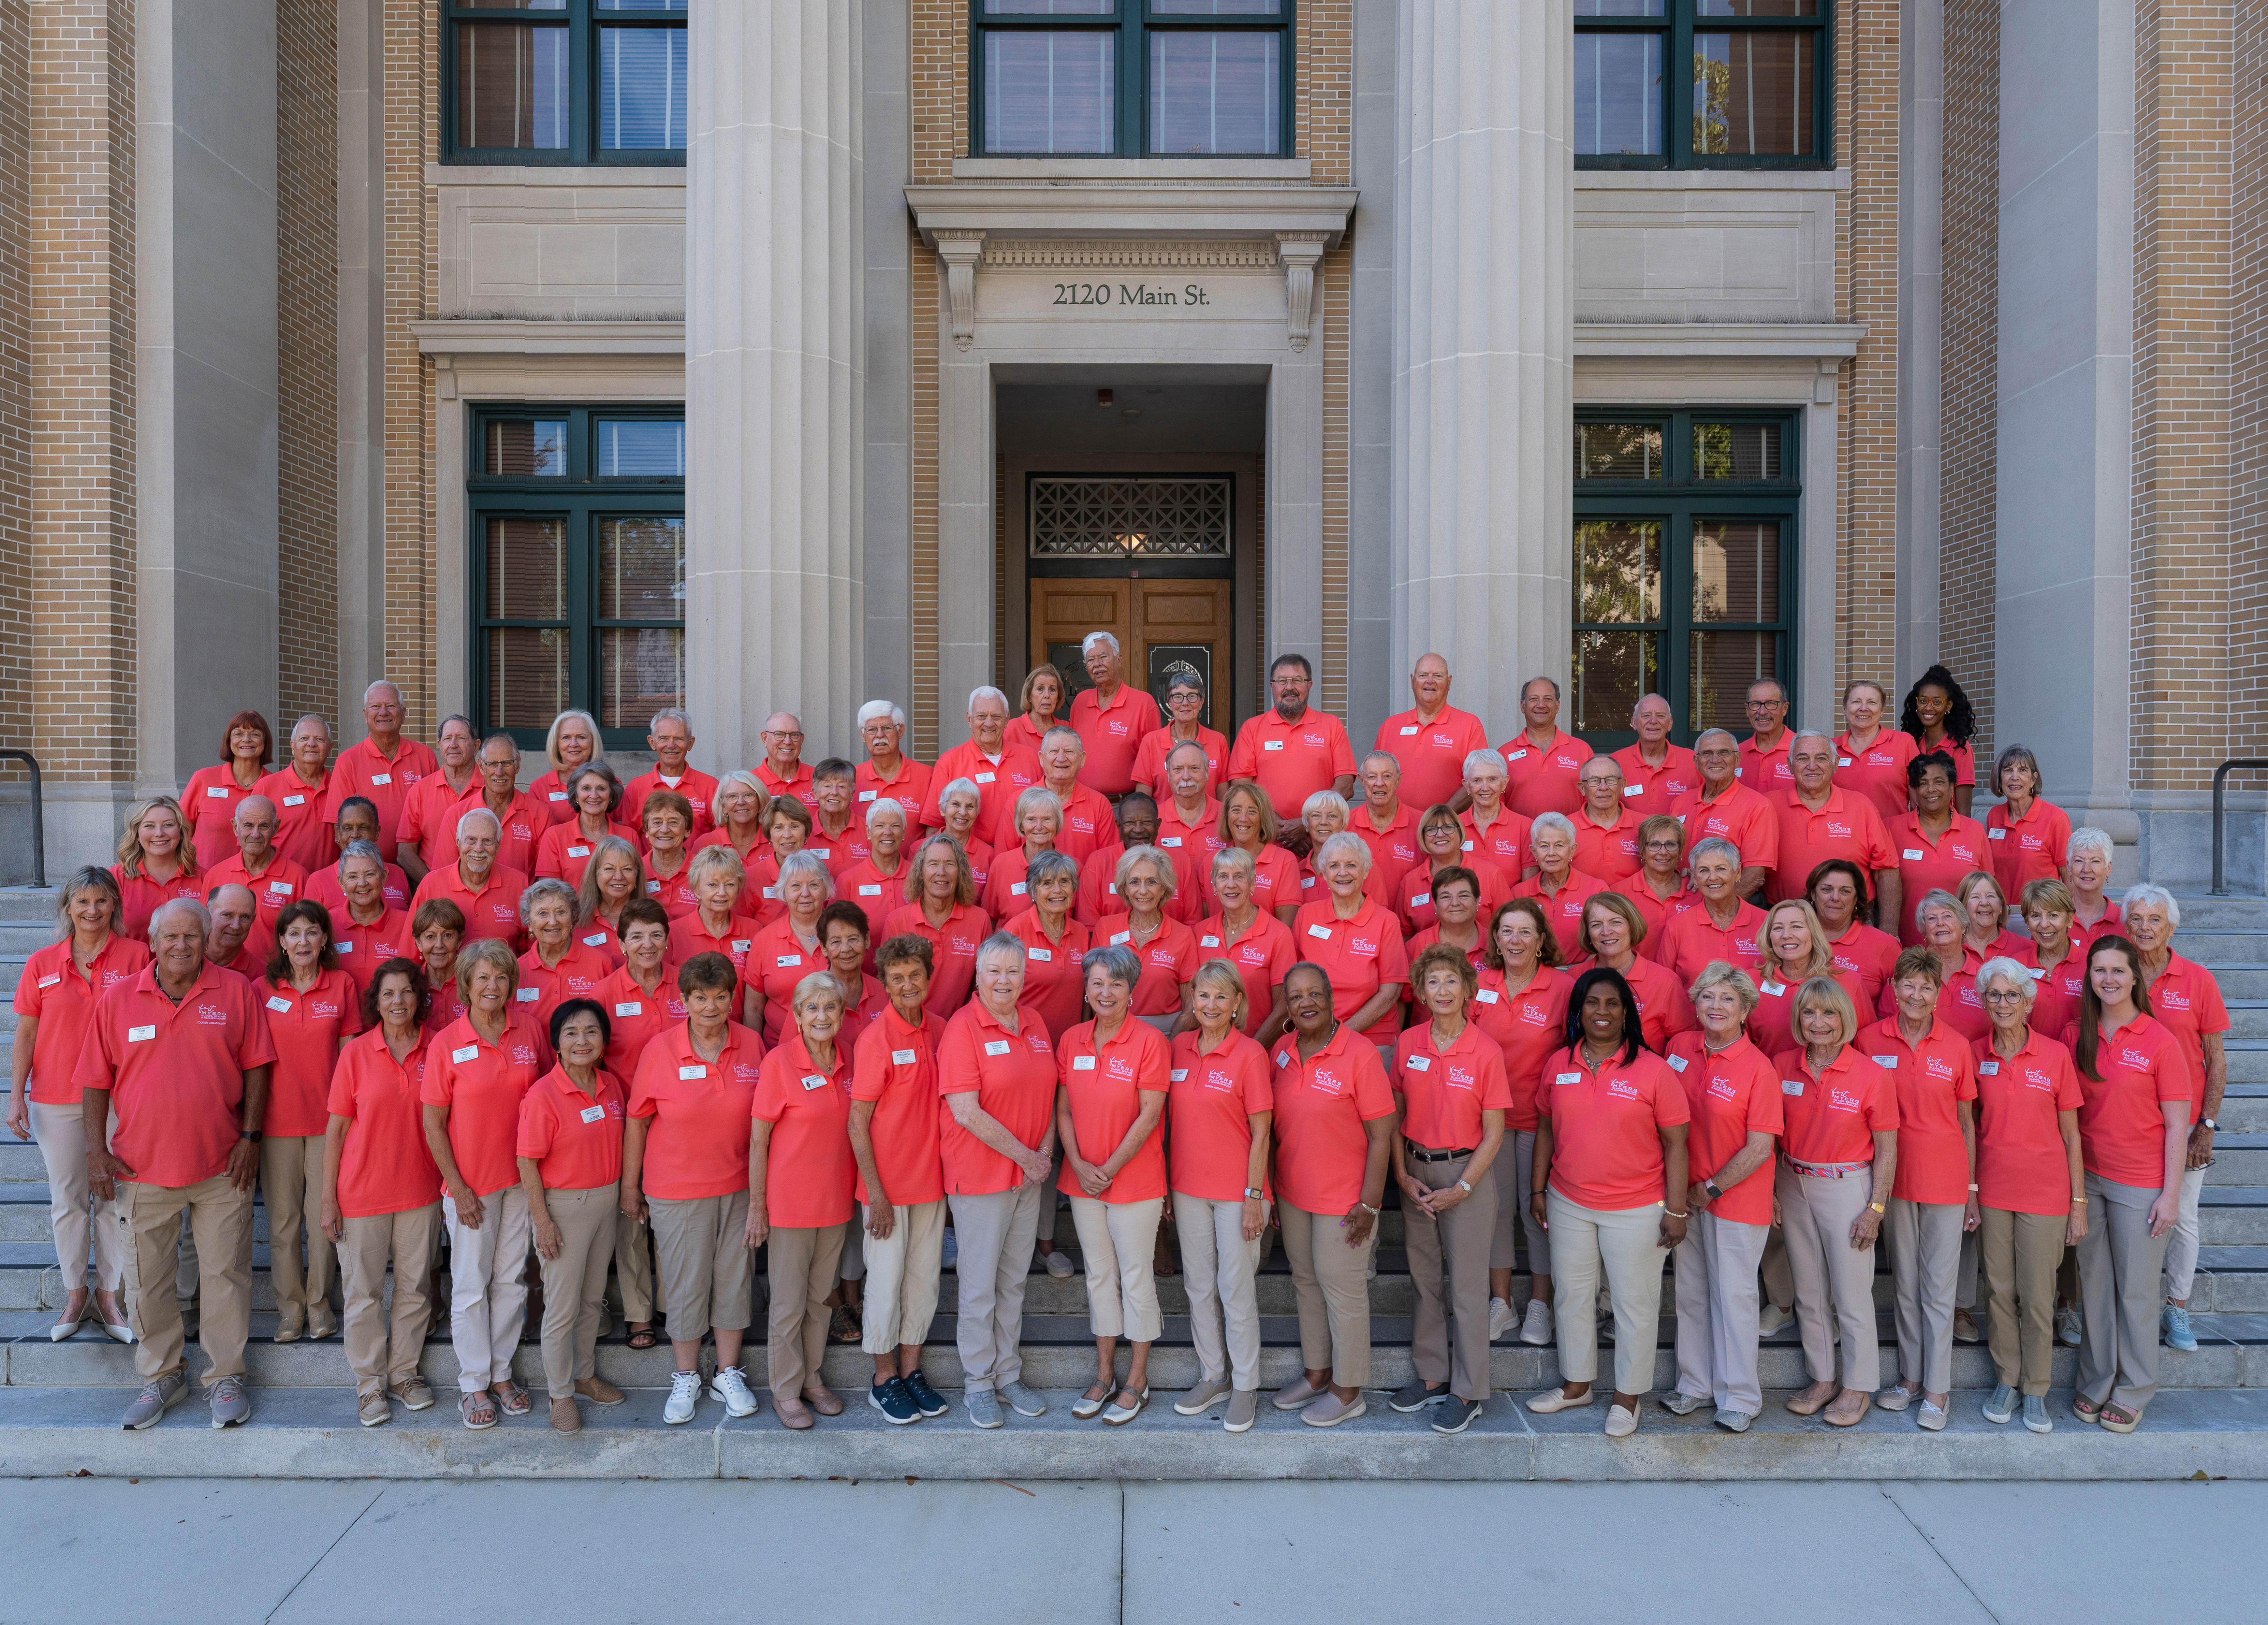 Group photo of volunteers wearing coral shorts on steps